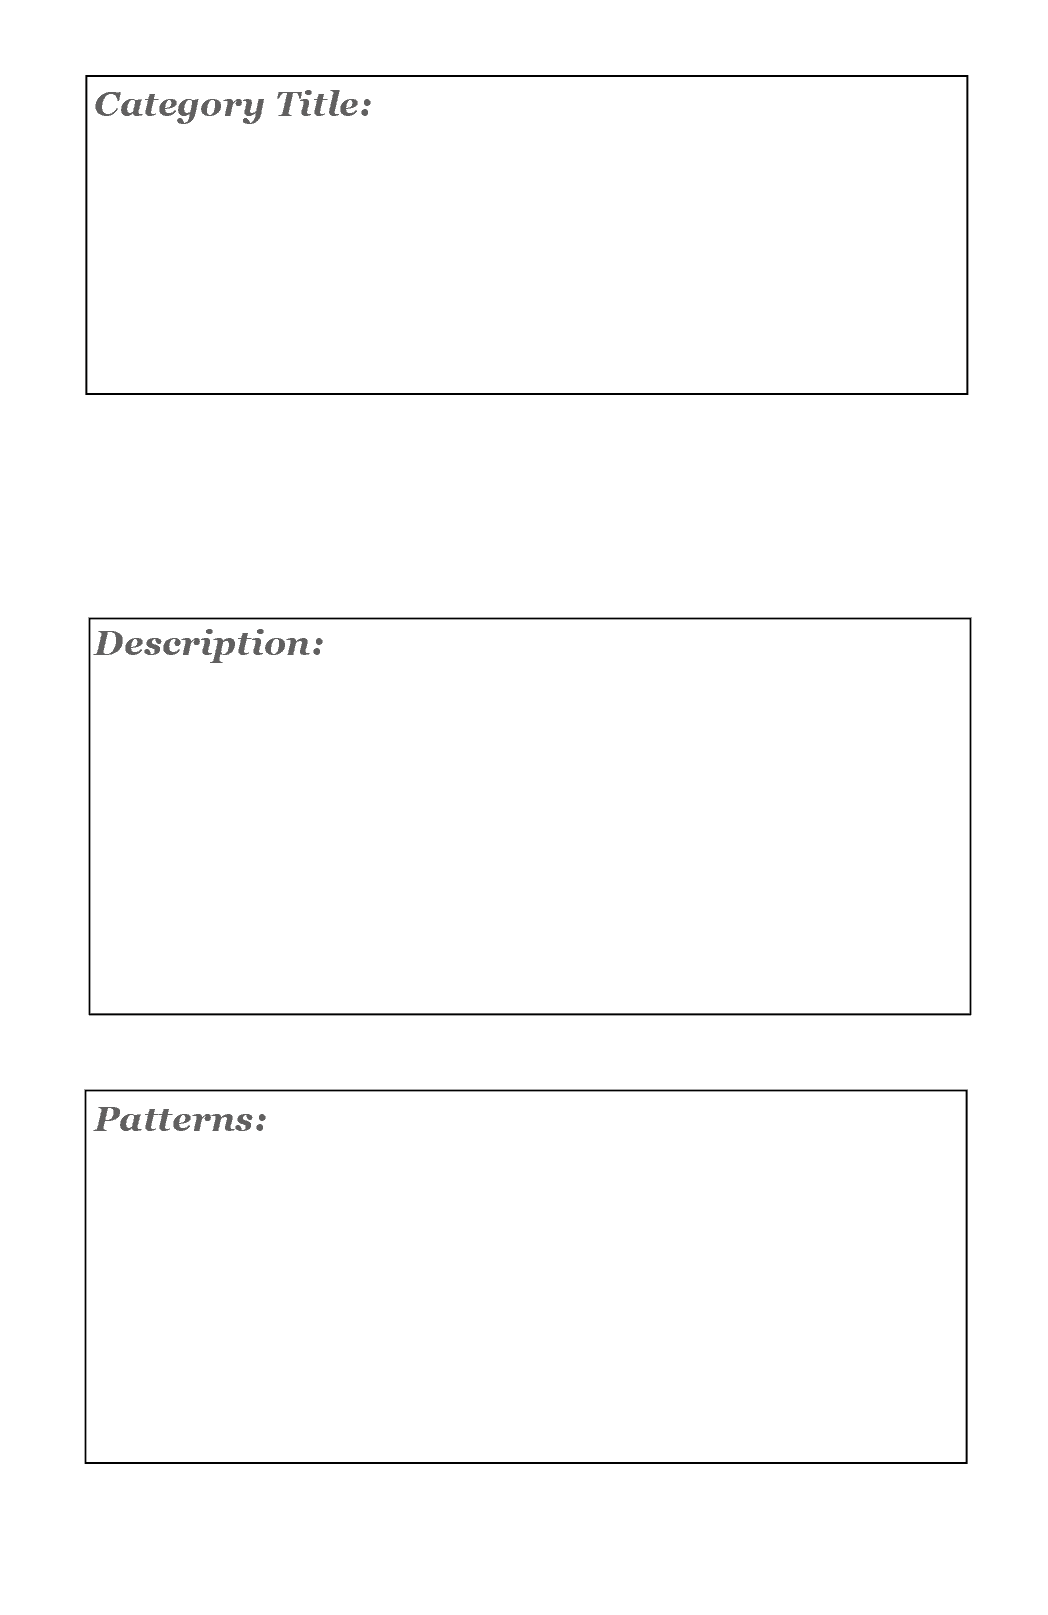 Category Card Template Image